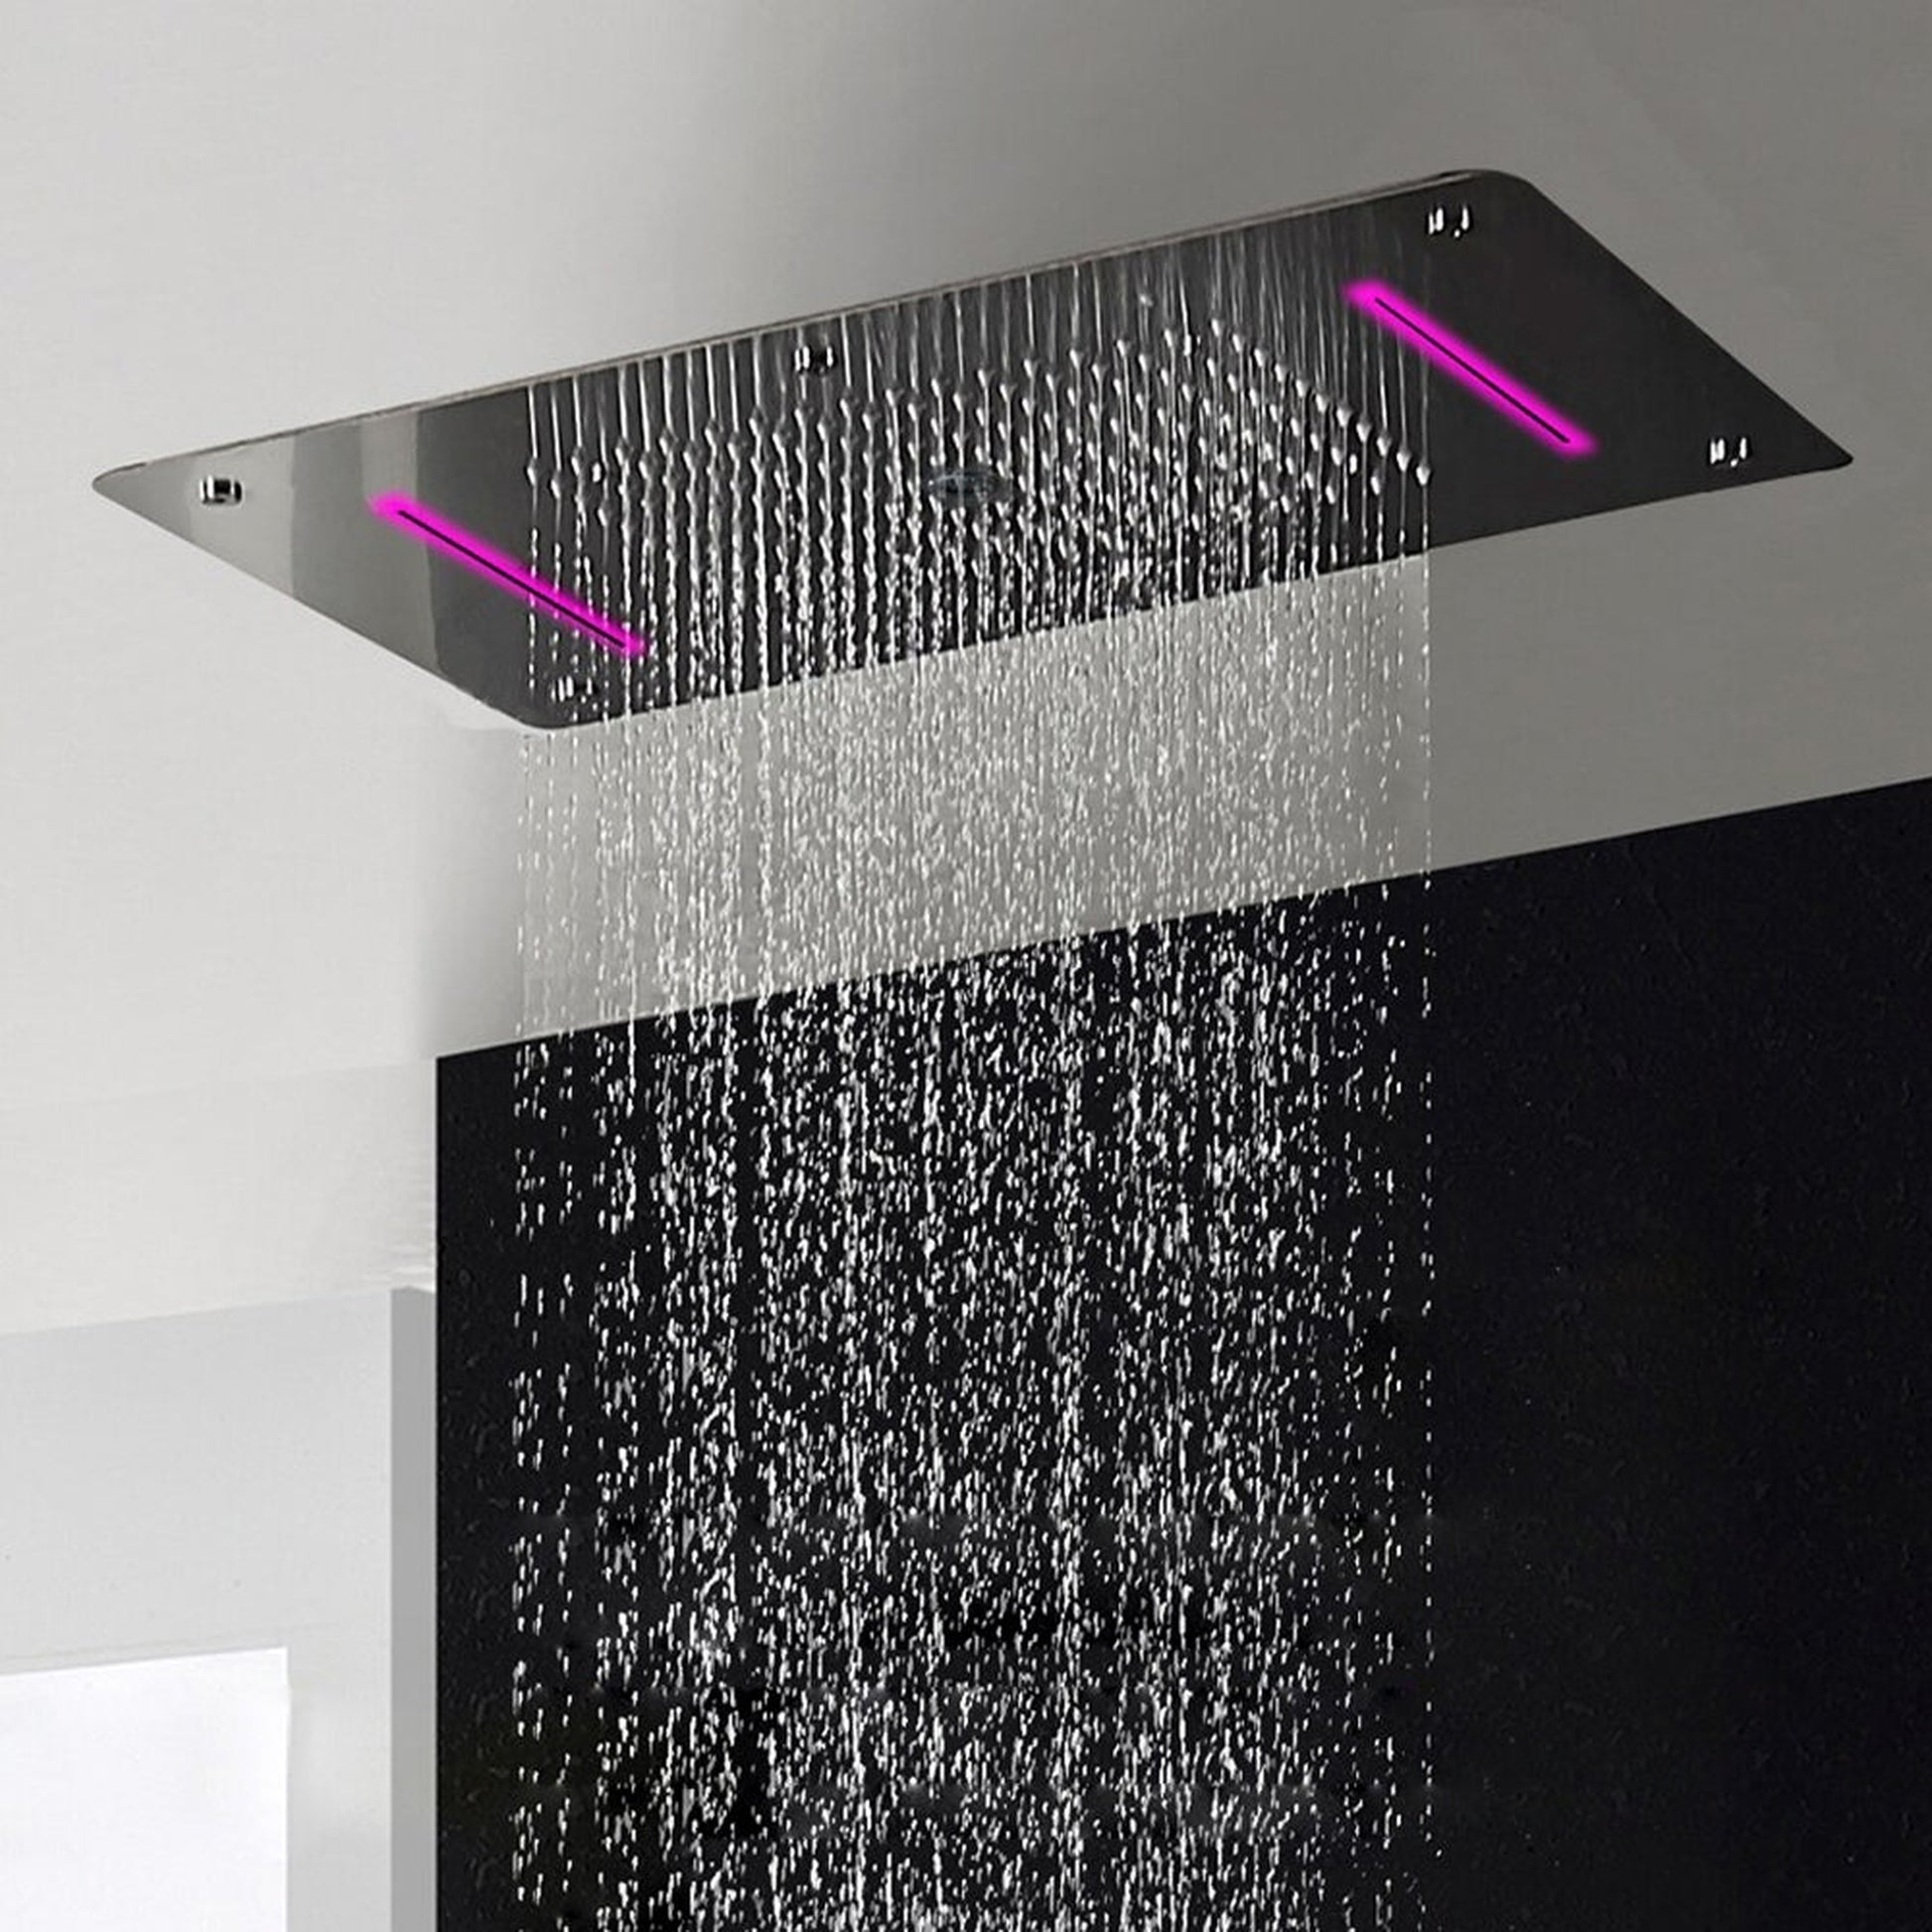 Fontana Cesena Chrome Recessed Ceiling Mounted Thermostatic LED Rainfall, Waterfall & Mist Massage Luxury Shower System With Hand Shower and 3-Jet Body Sprays